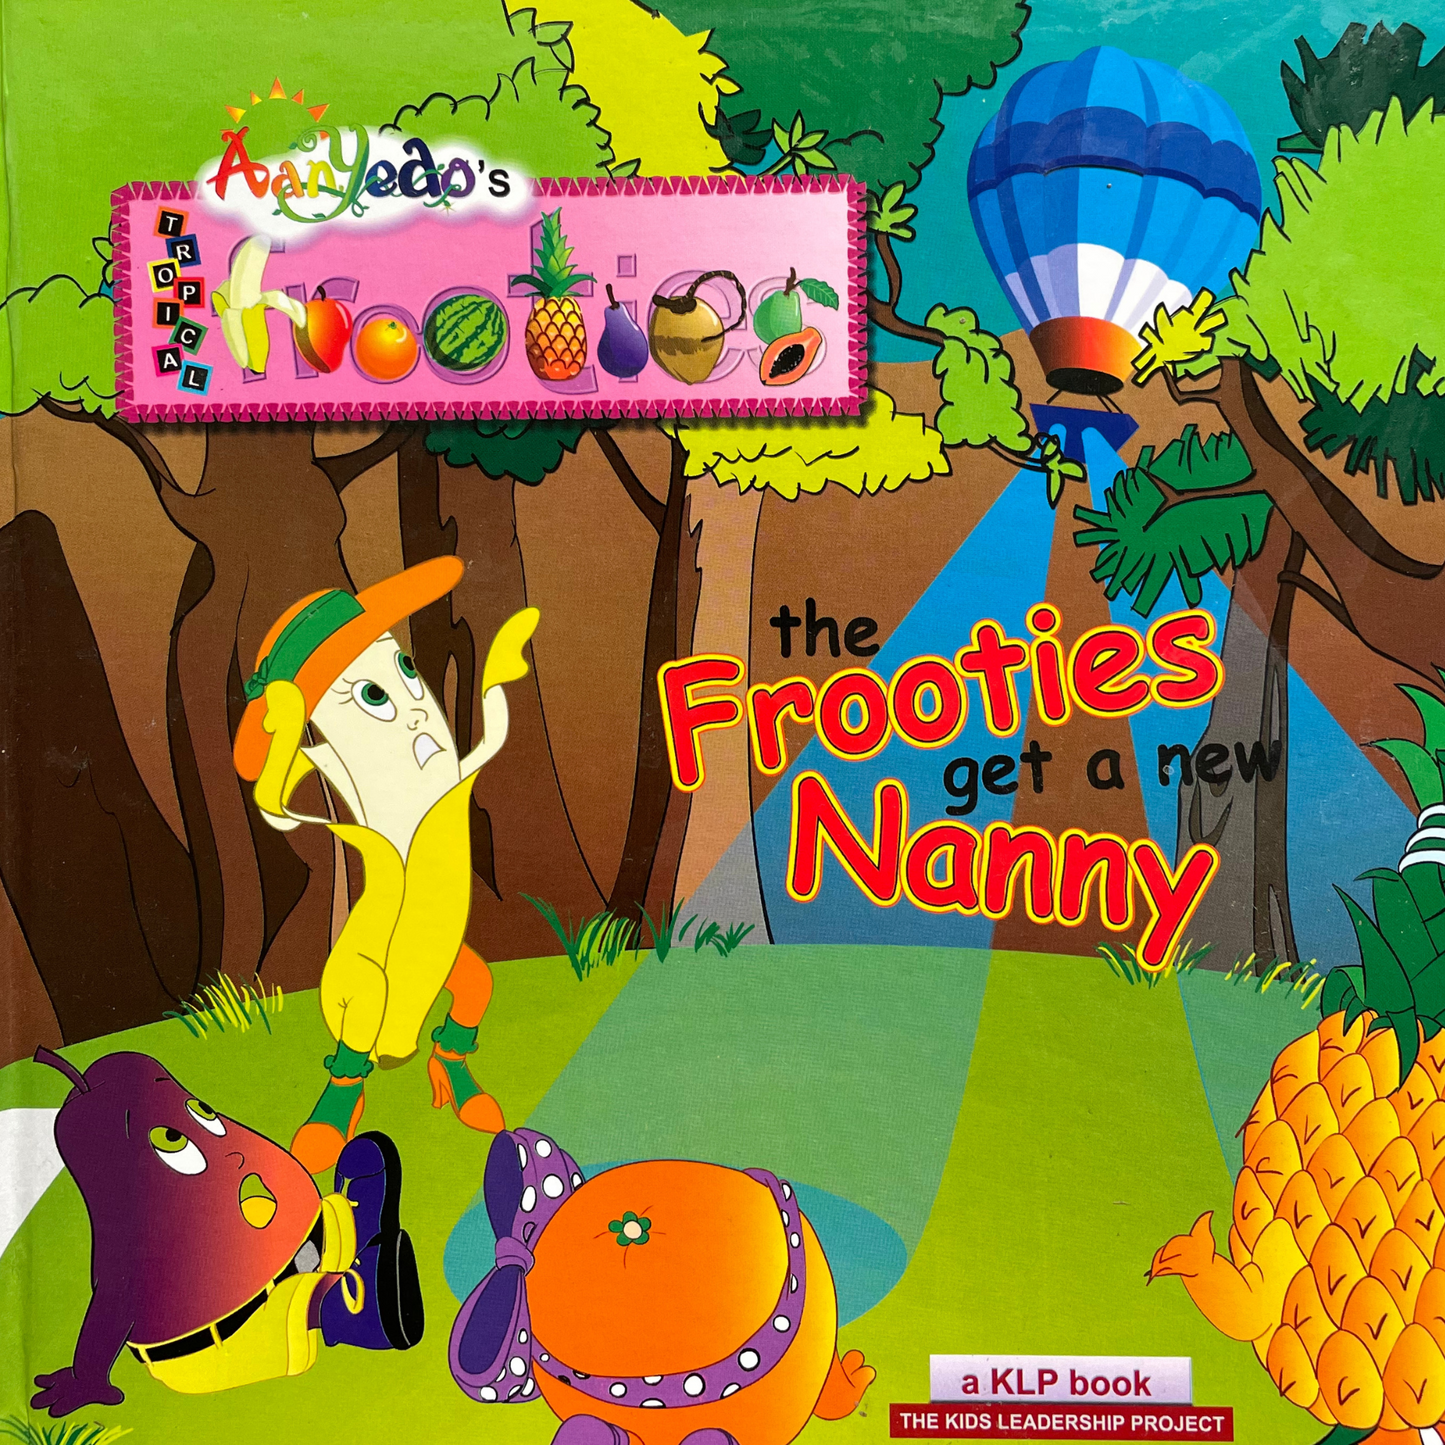 The Frooties get a new Nanny